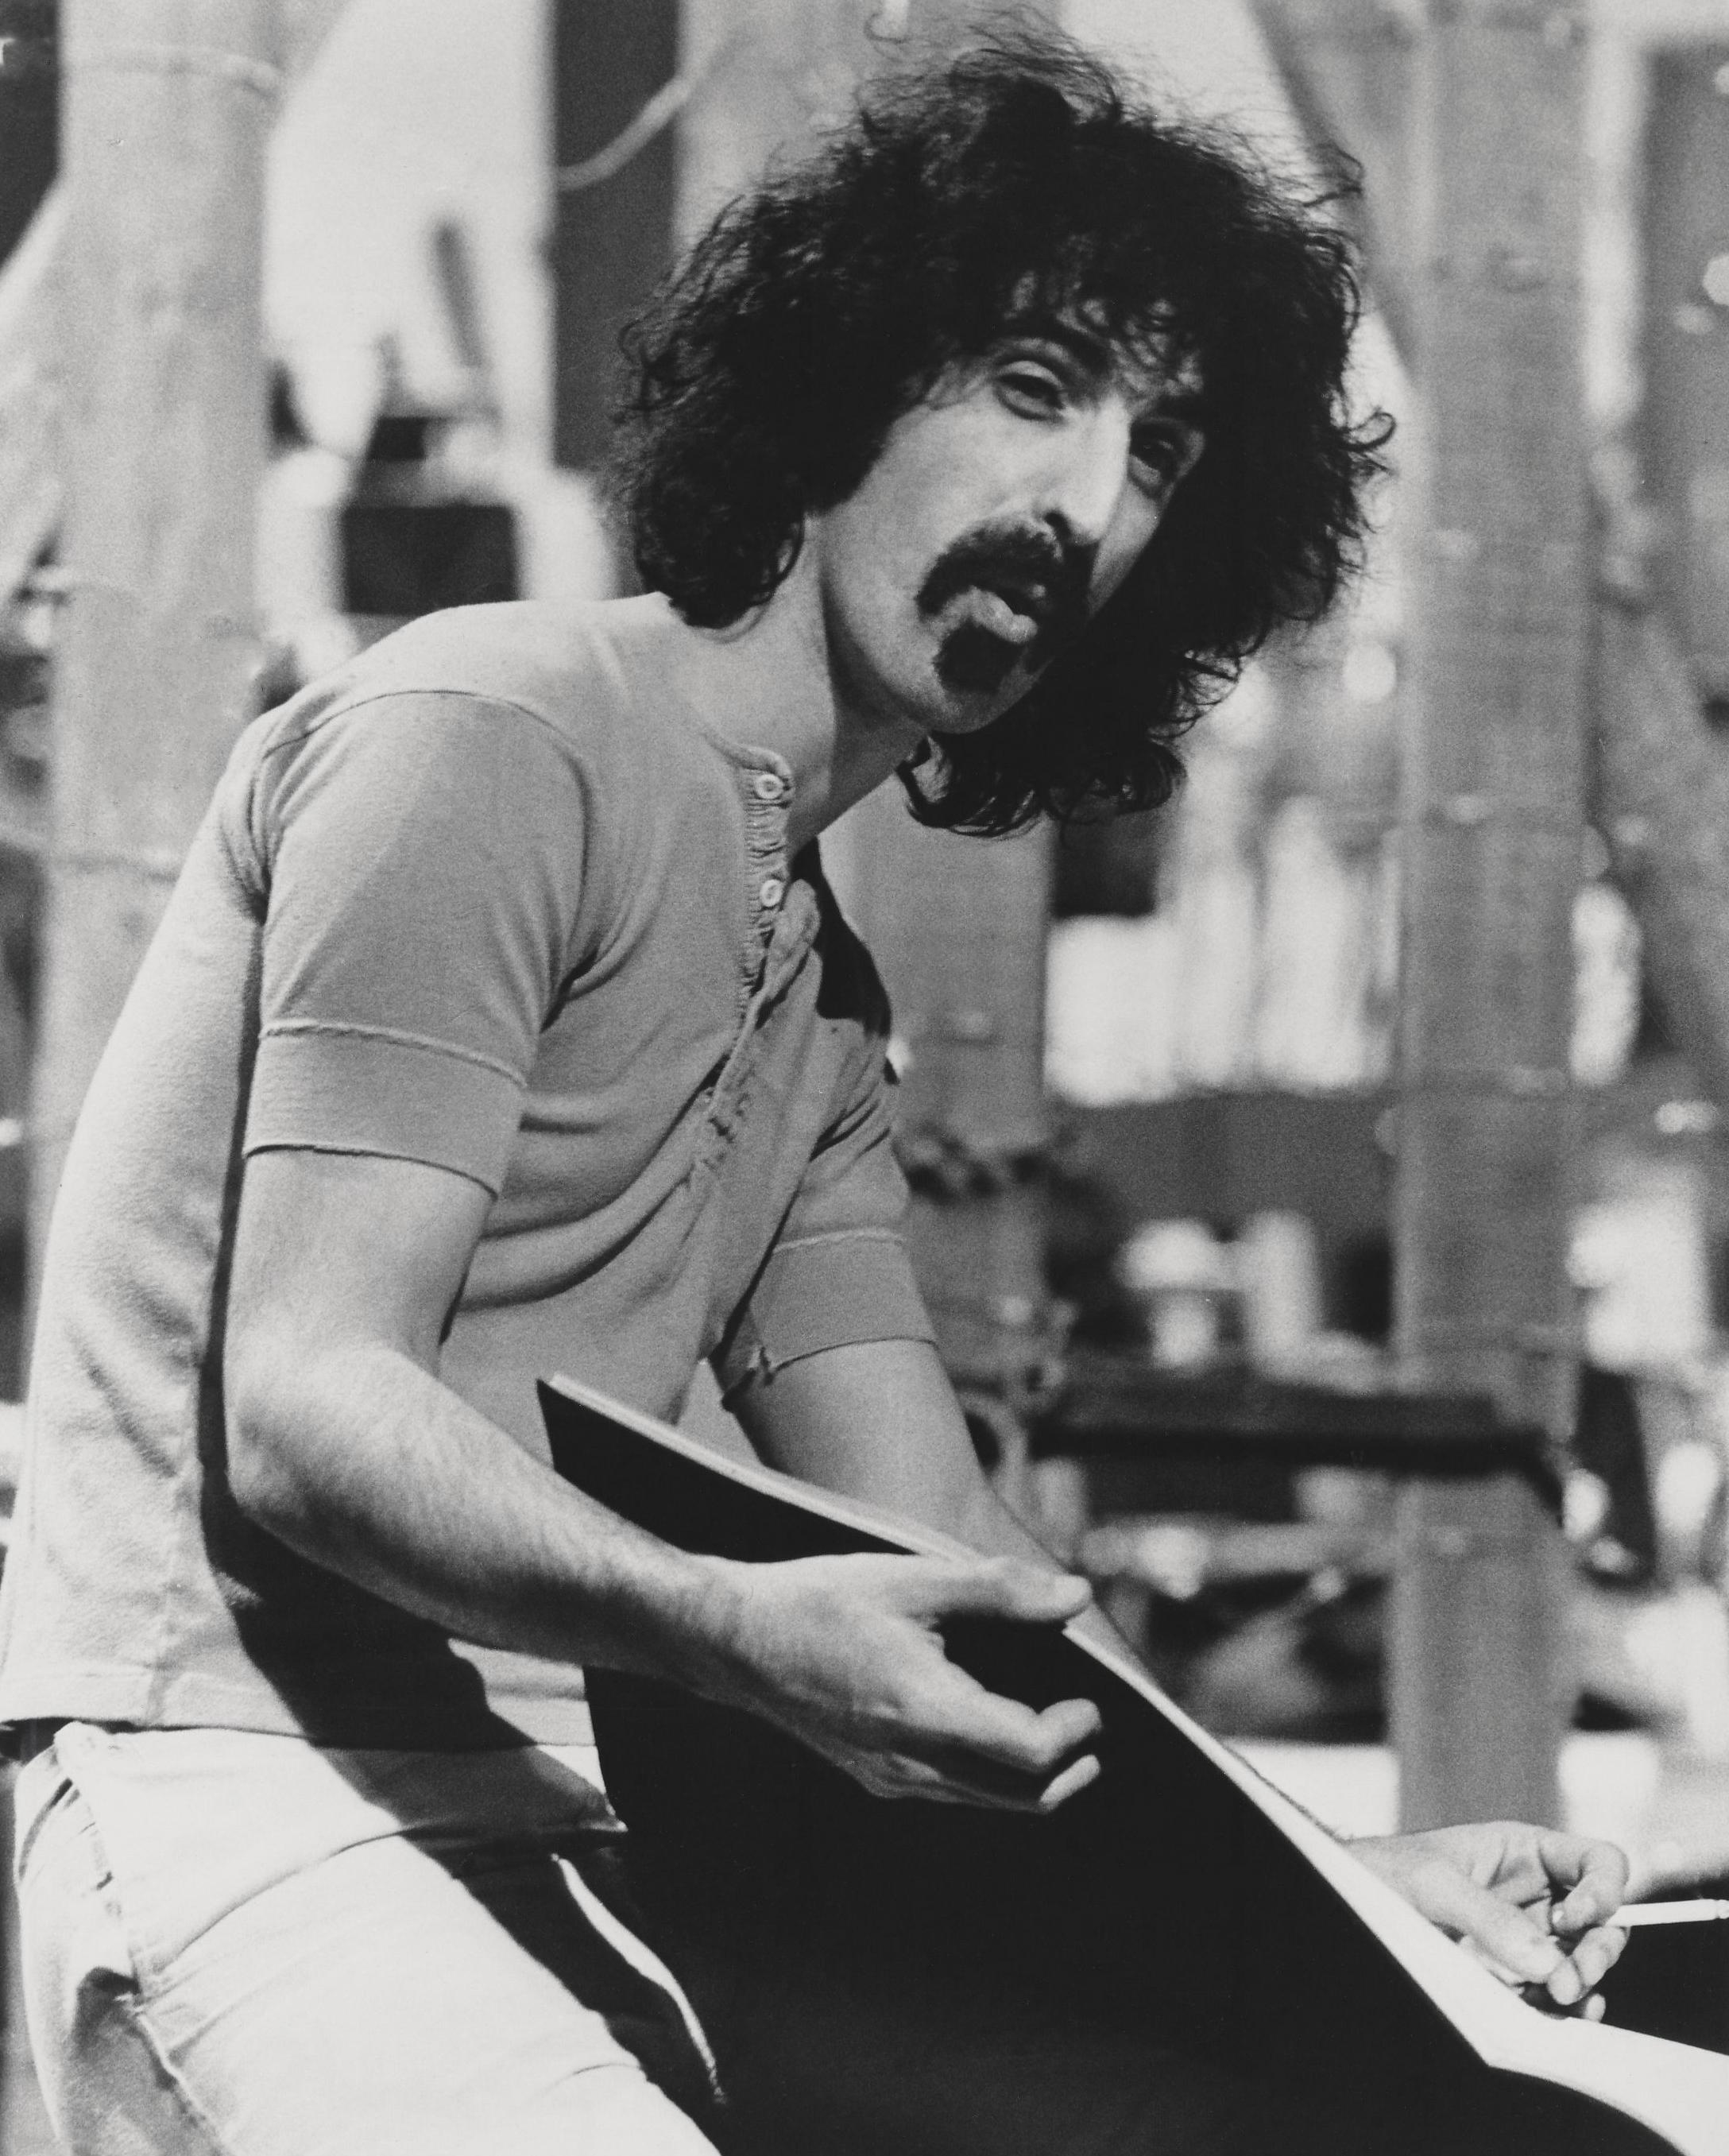 Unknown Black and White Photograph - Frank Zappa the Legendary Musician Candid Globe Photos Fine Art Print